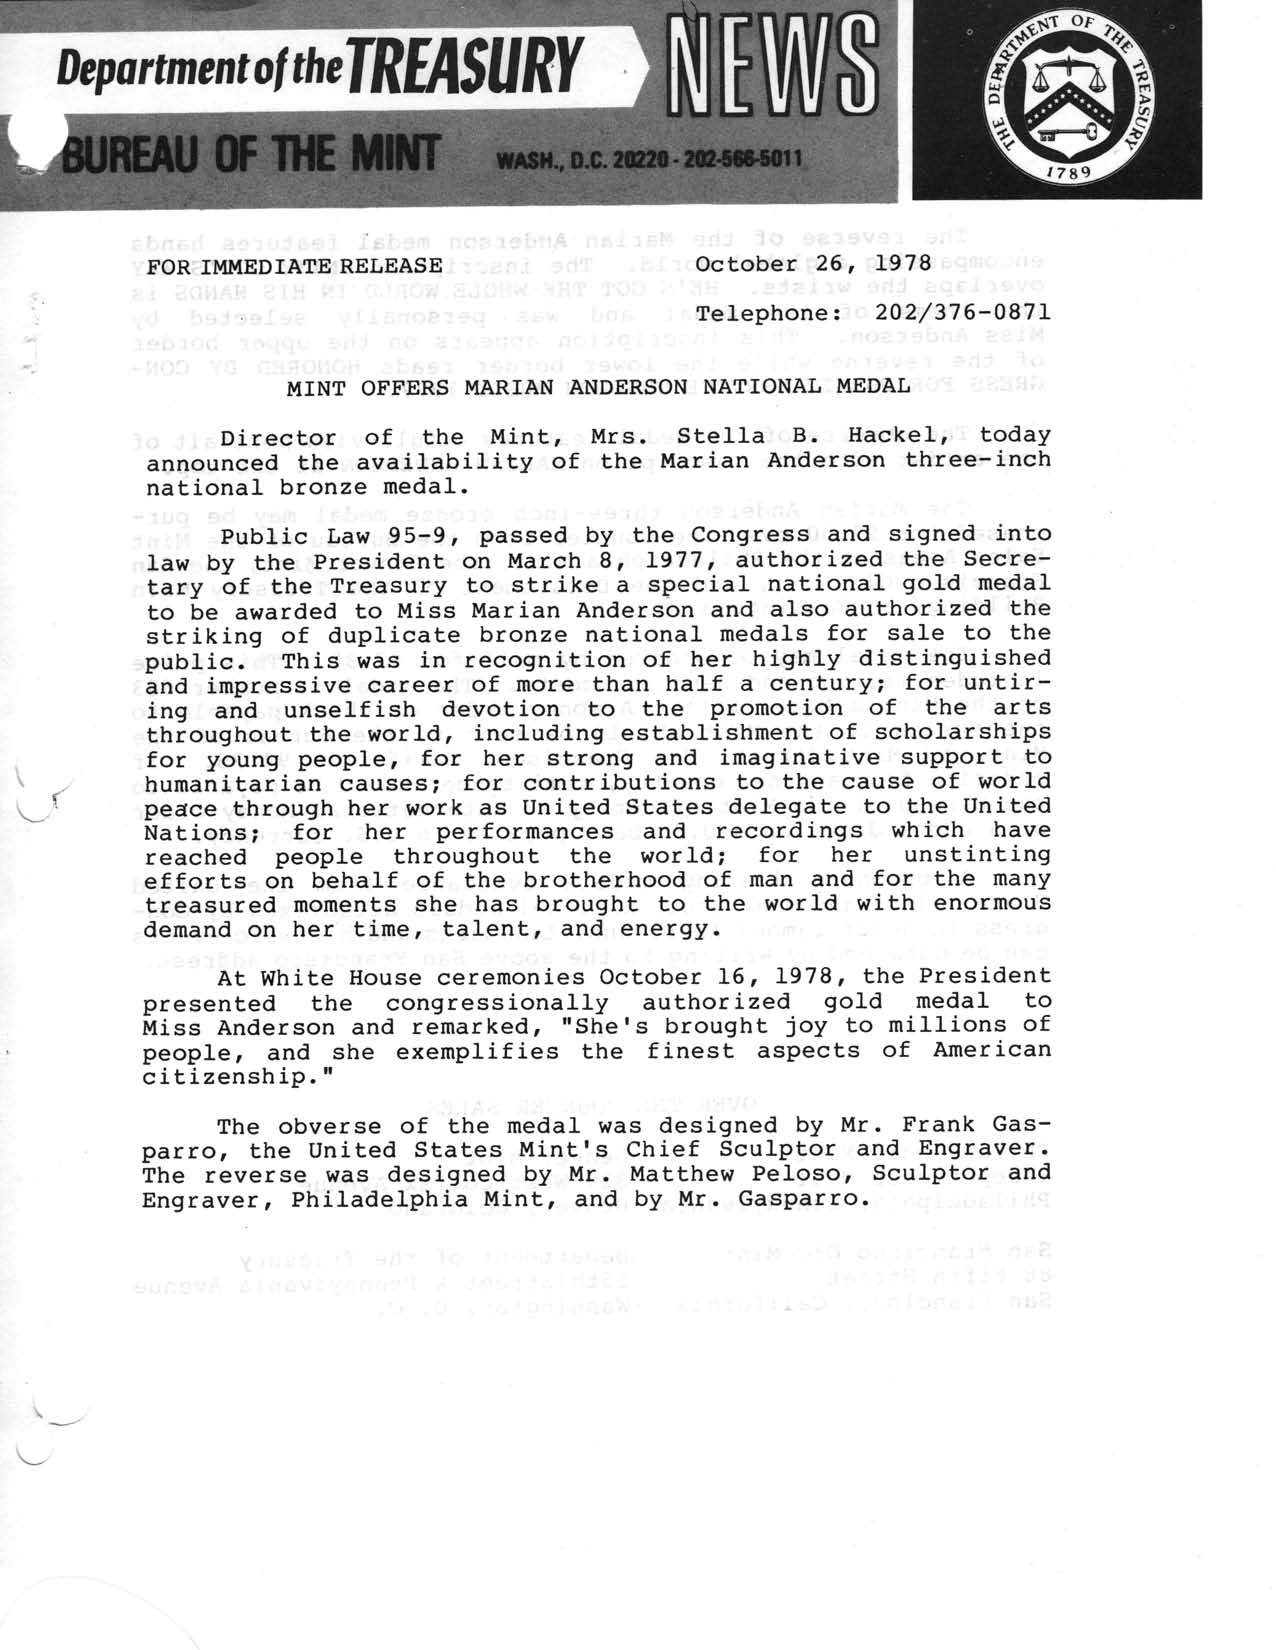 Historic Press Release: Marian Anderson National Medal, Page 1